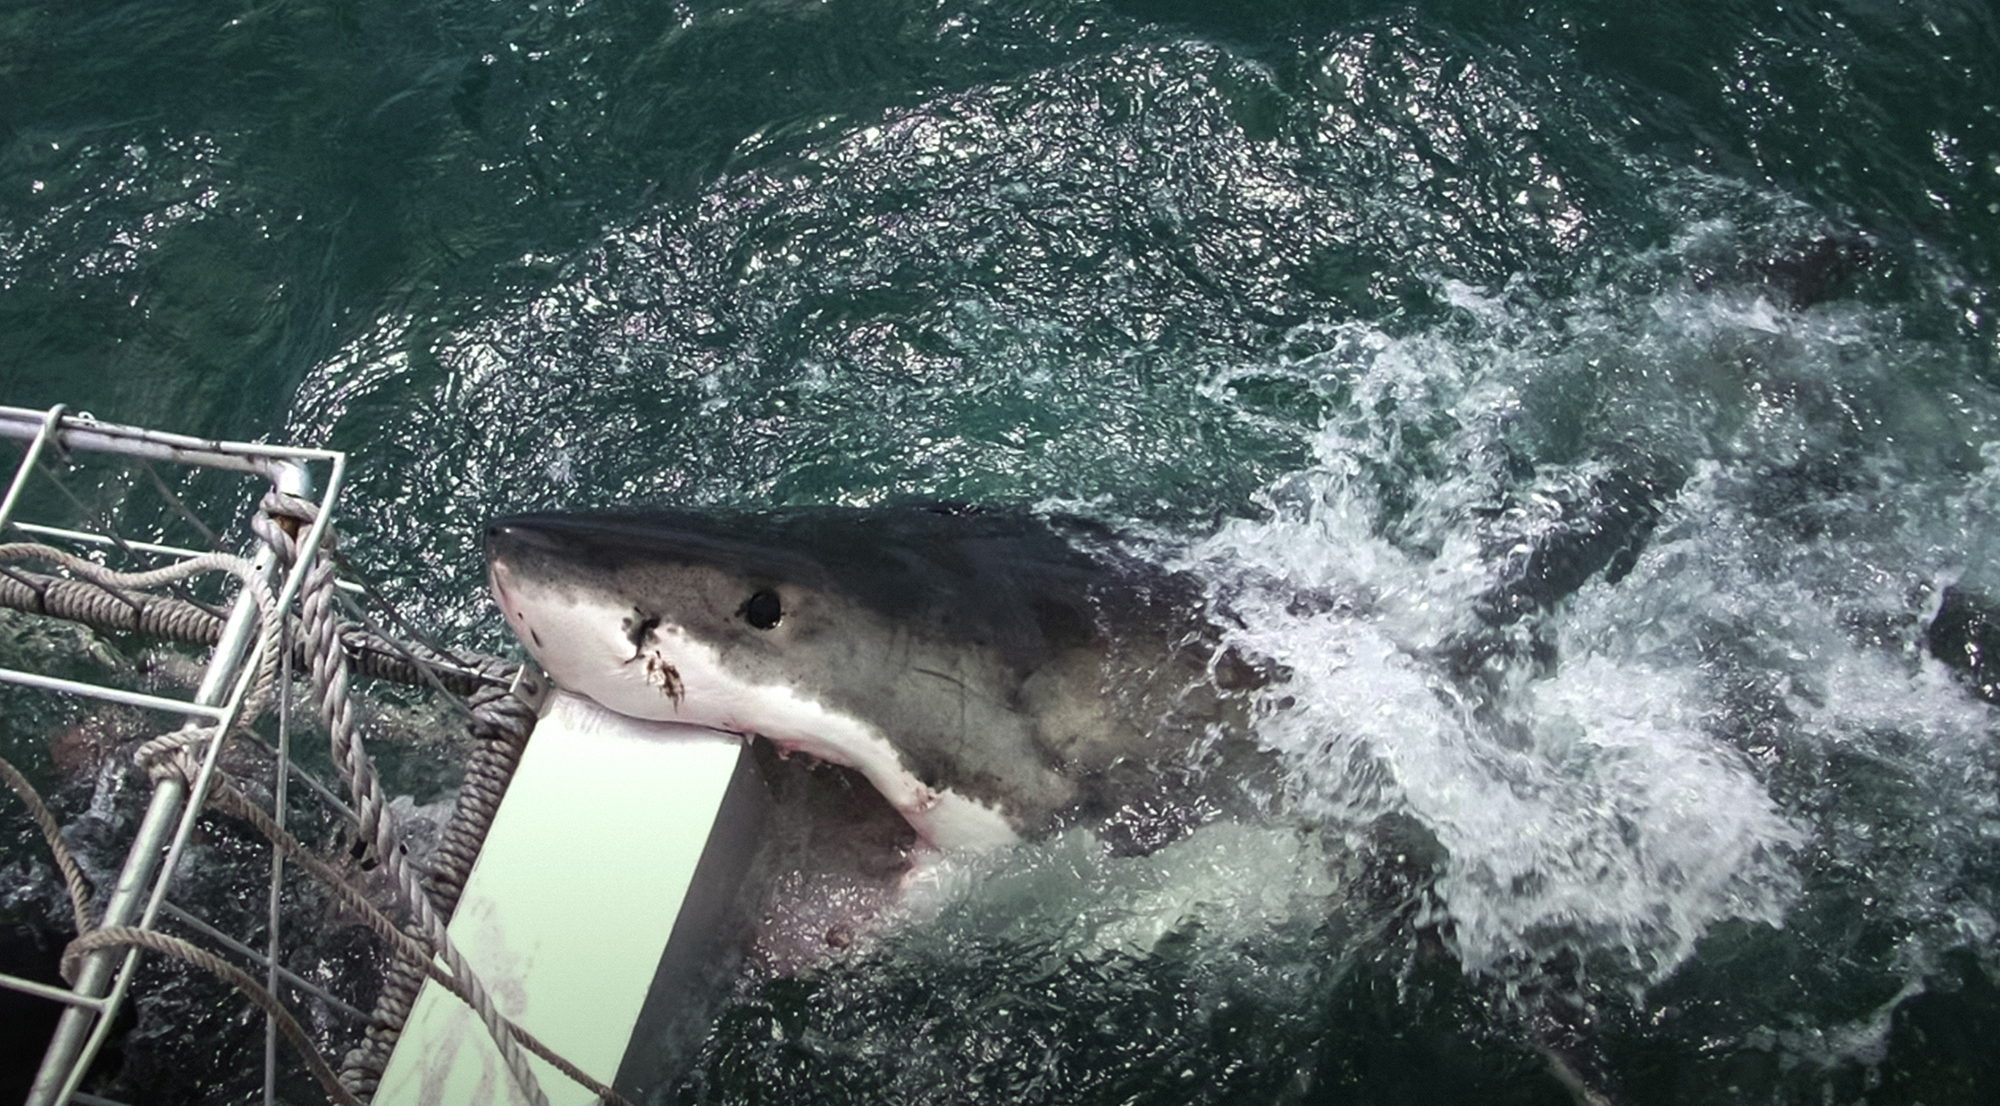 does the great white shark home in on fish feed grow